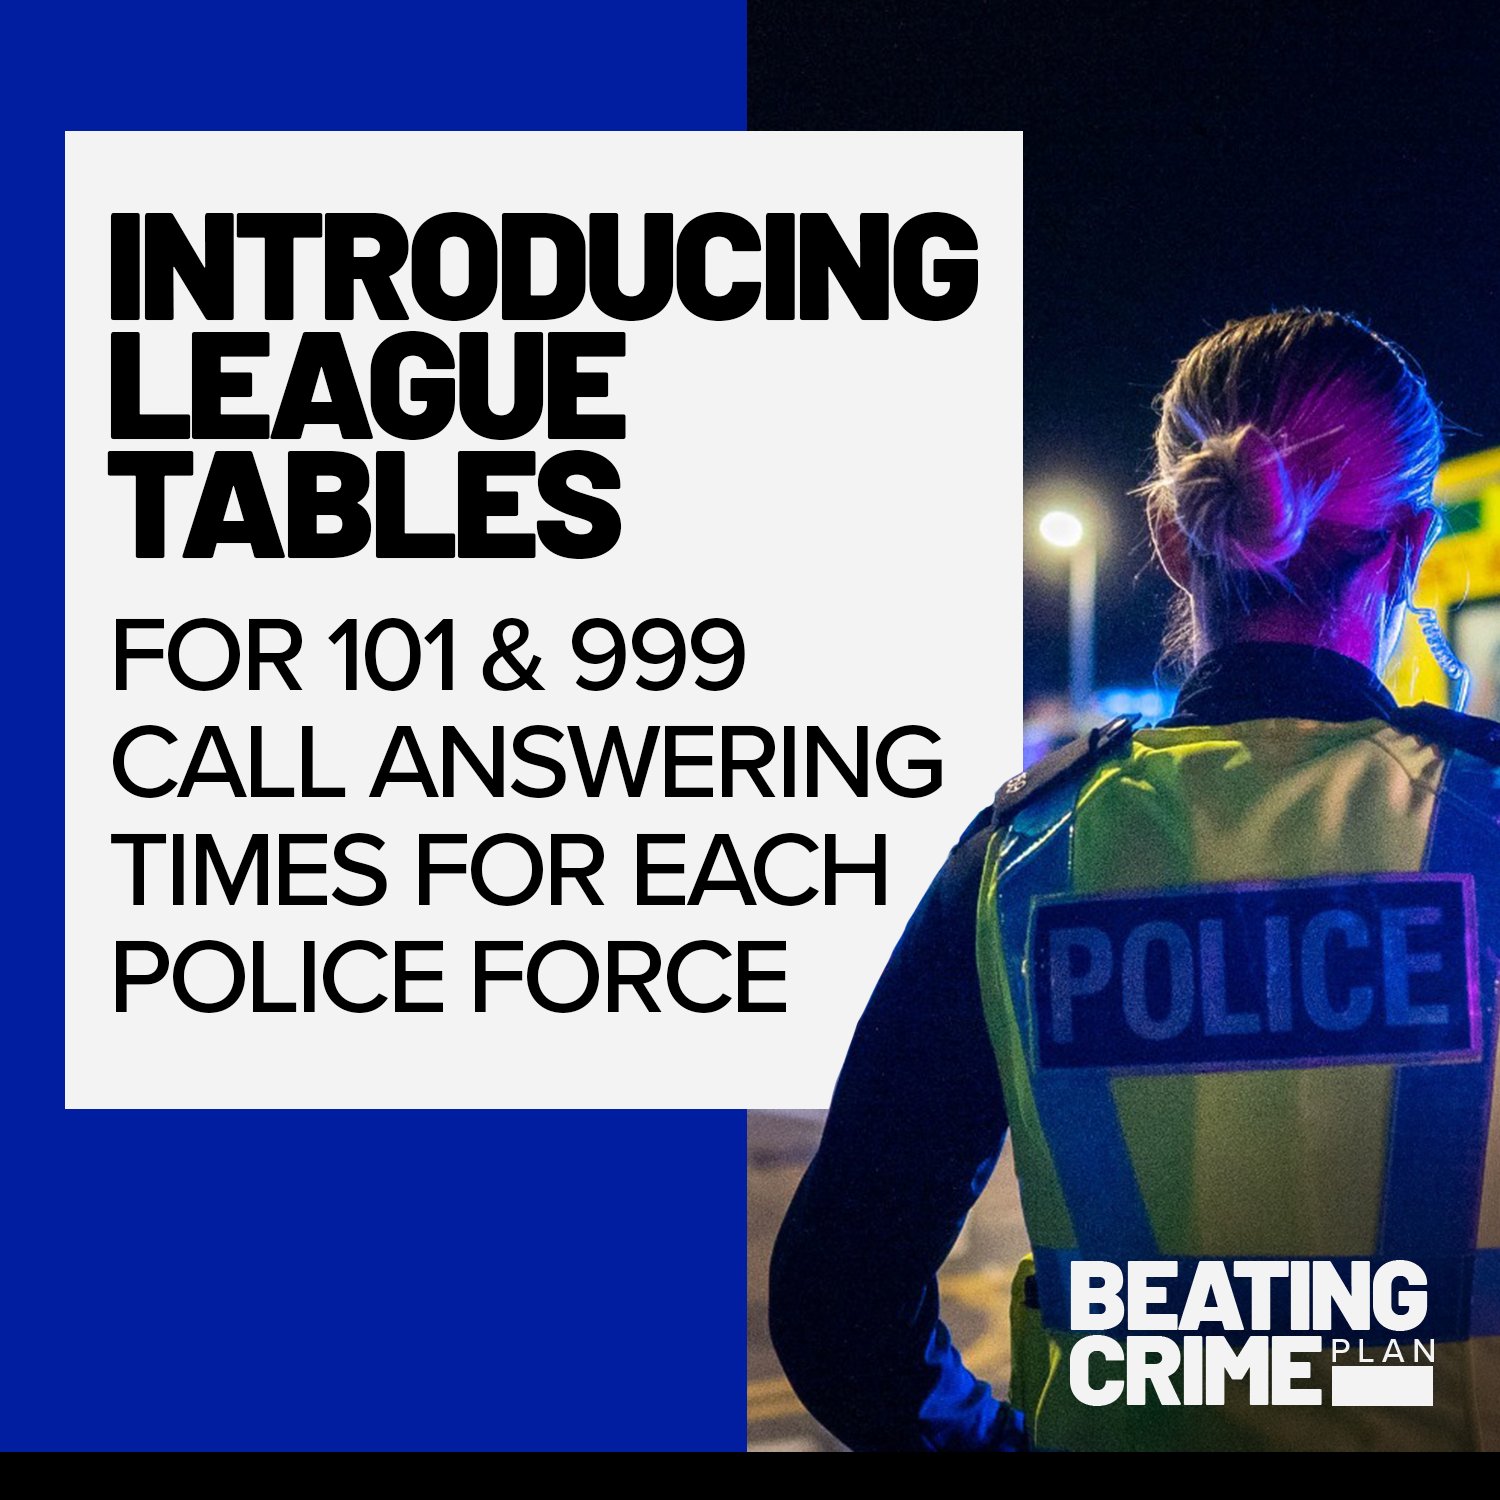 Beating Crime Plan - introducing league tables